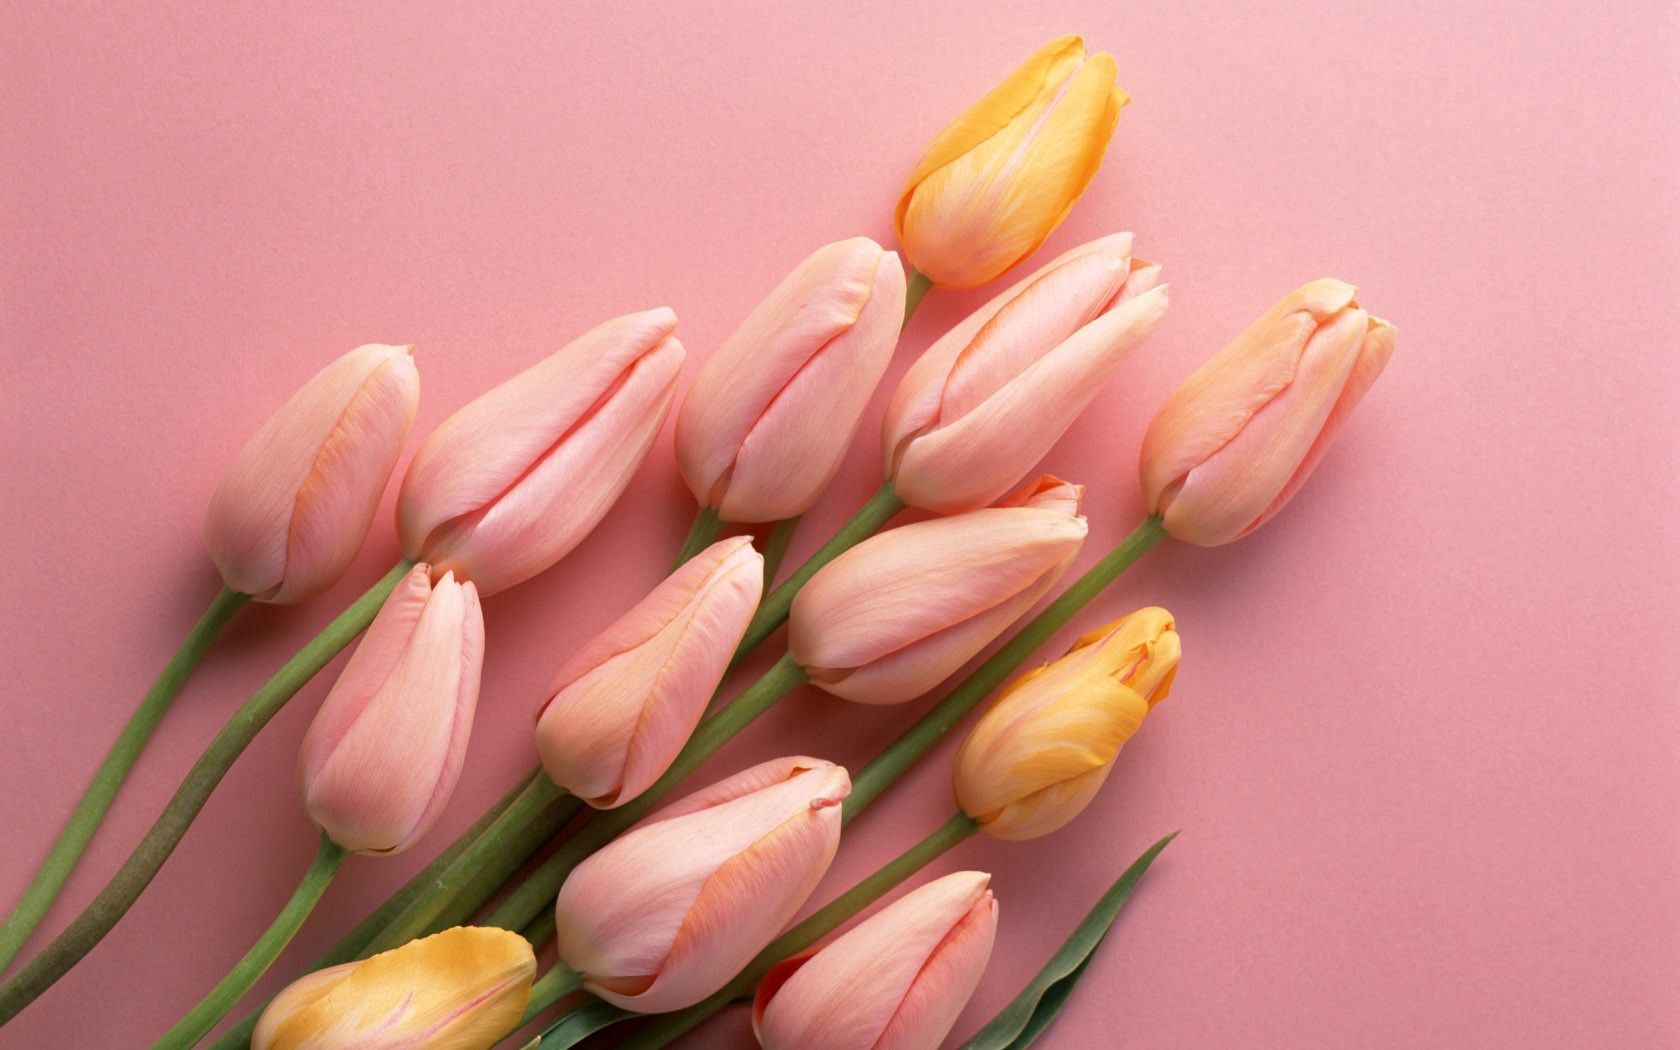 Download Tulips wallpaper for mobile phone, free Tulips HD picture